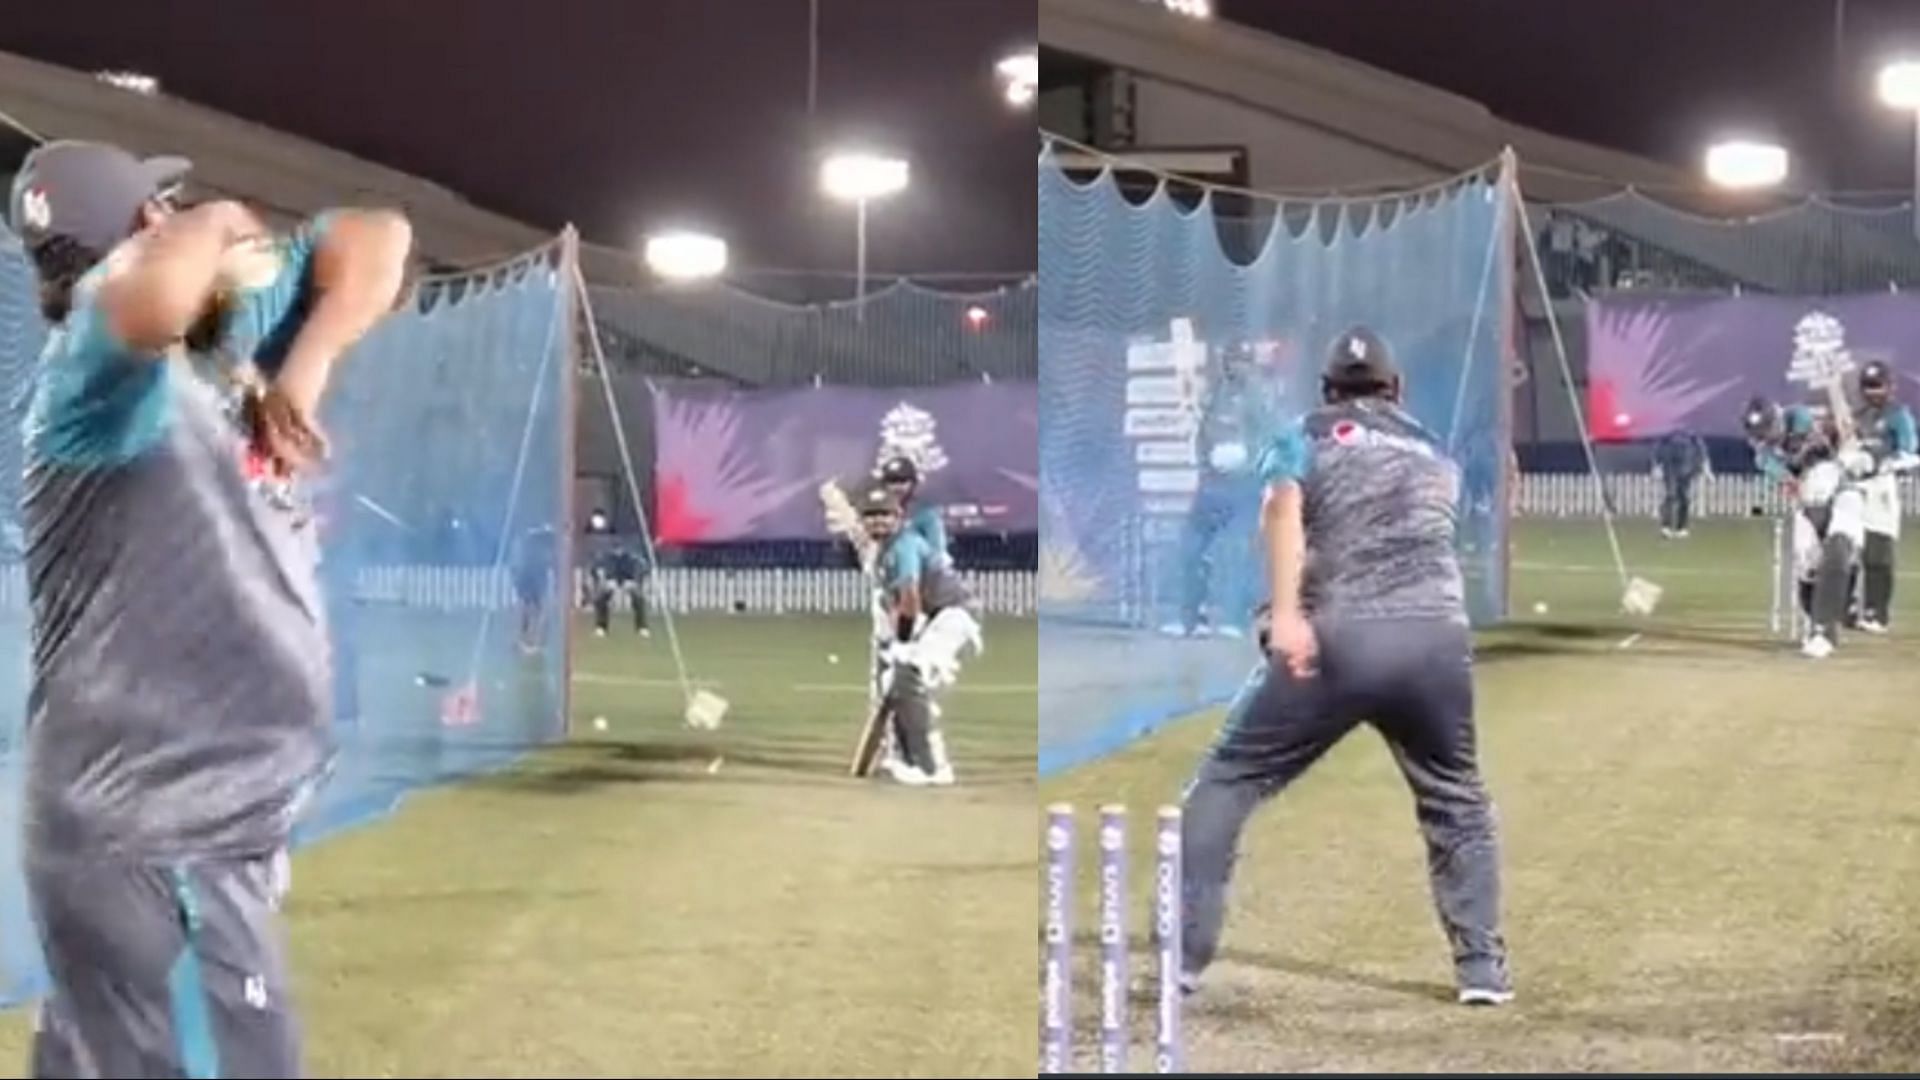 Saqlain Mushtaq bowled a few deliveries to Pakistan cricket team captain Babar Azam in the nets